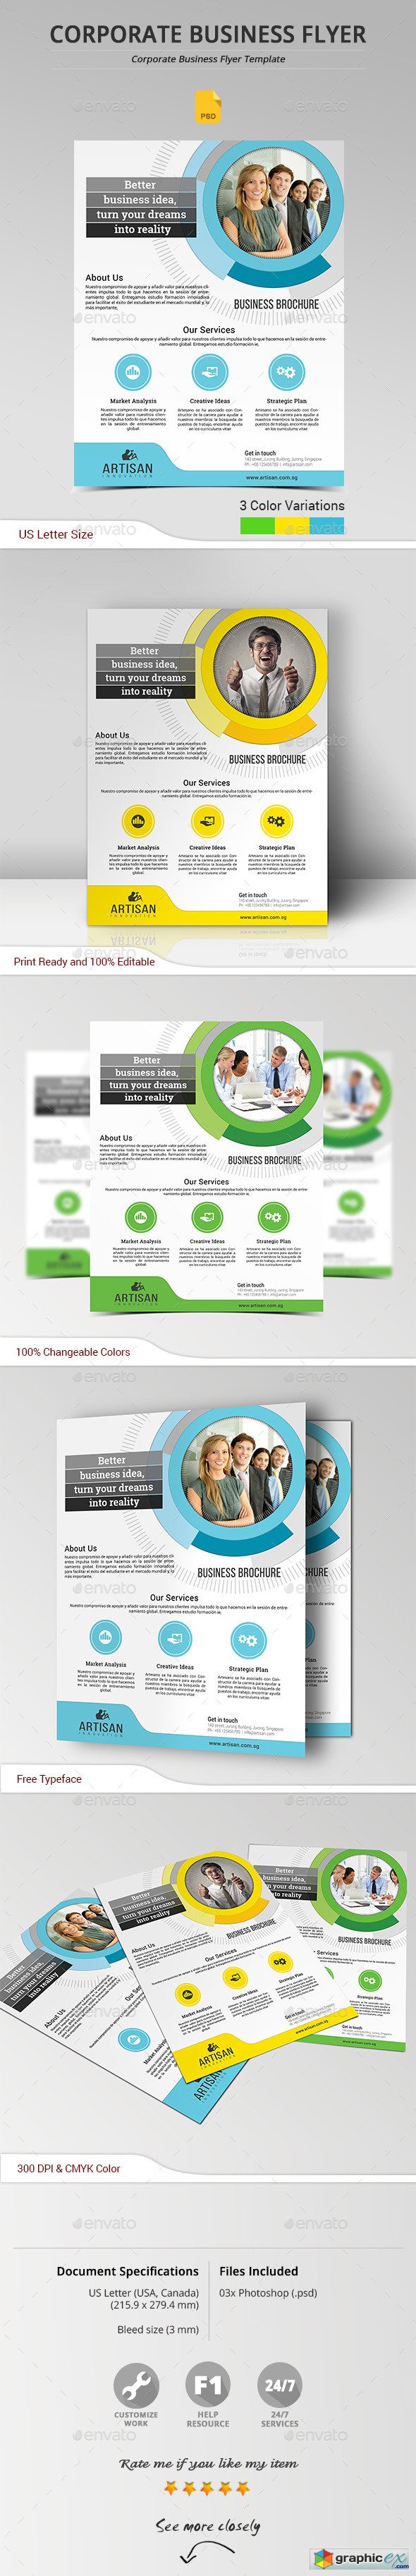 Corporate Business Flyer 11663957